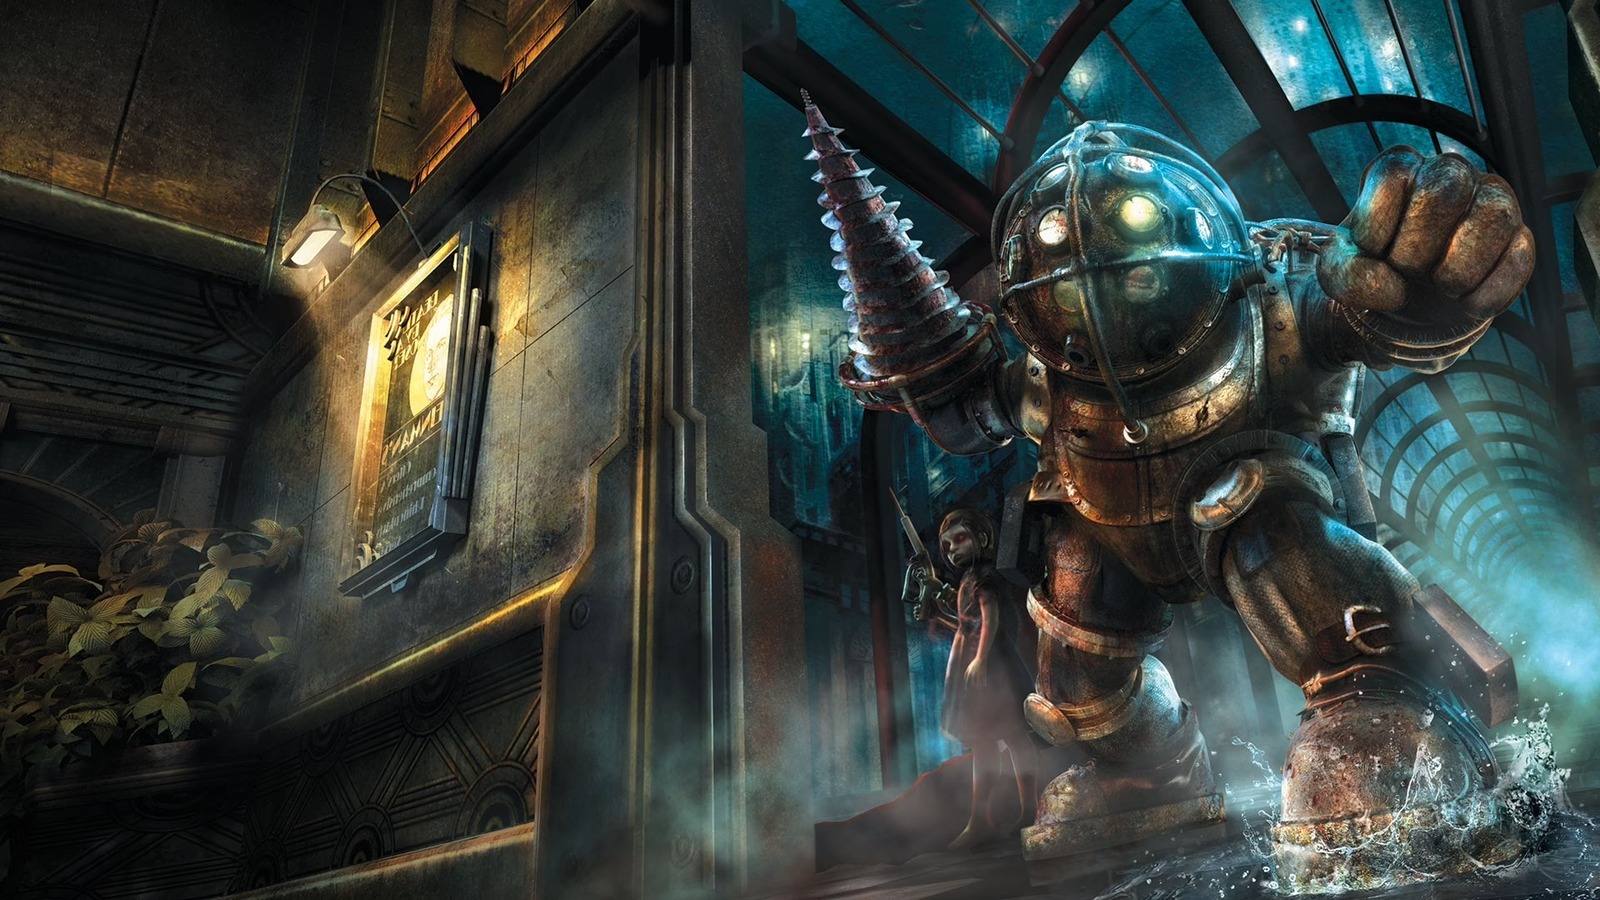 BioShock Director Francis Lawrence Explains What Drew Him To The Adaptation: 'It's One Of The Best Games Ever Created', Digital Rumble, digitalrumble.com